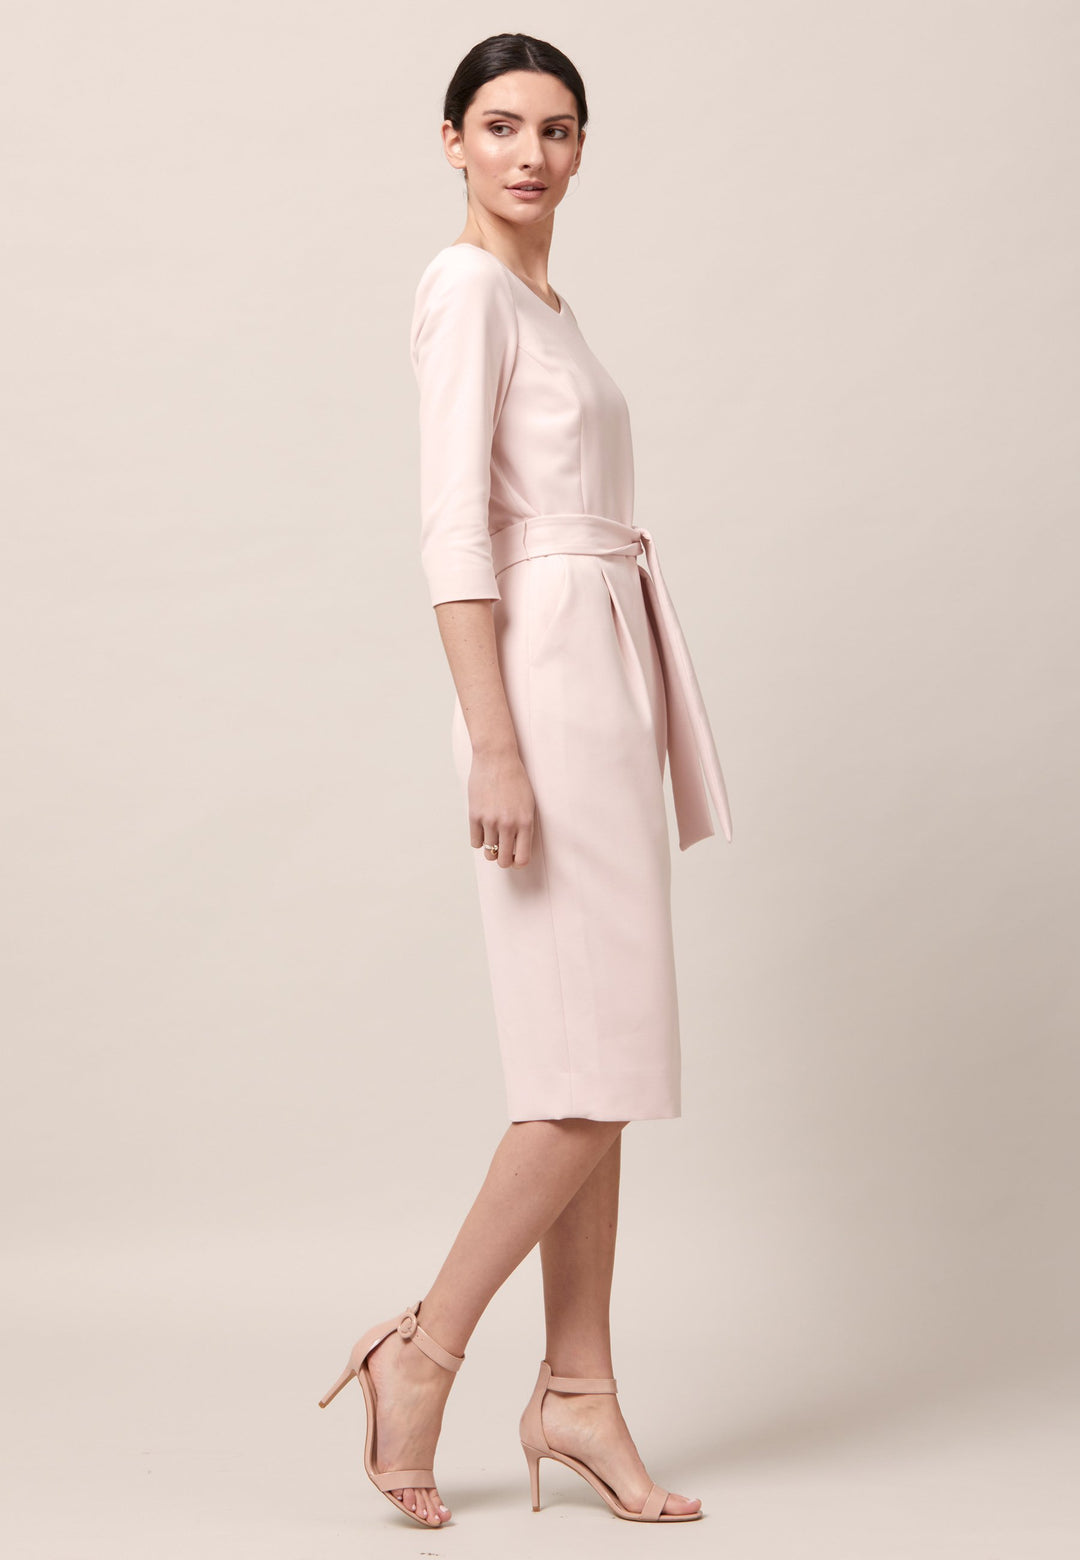 The Clara is a classic silhouette. An expertly tailored form-flattering silhouette with pockets, detachable belt & pencil skirt which falls to mid-calf. Engineered with a sophisticated wide V-neckline. Crafted from sustainably sourced fibers with a hint of stretch to ensure comfort & ease of movement. Heighten the drama of this piece with your favourite accessories and heels. Attending a summer wedding? Mother of the bride? Heading to the races? This is the dress for you.